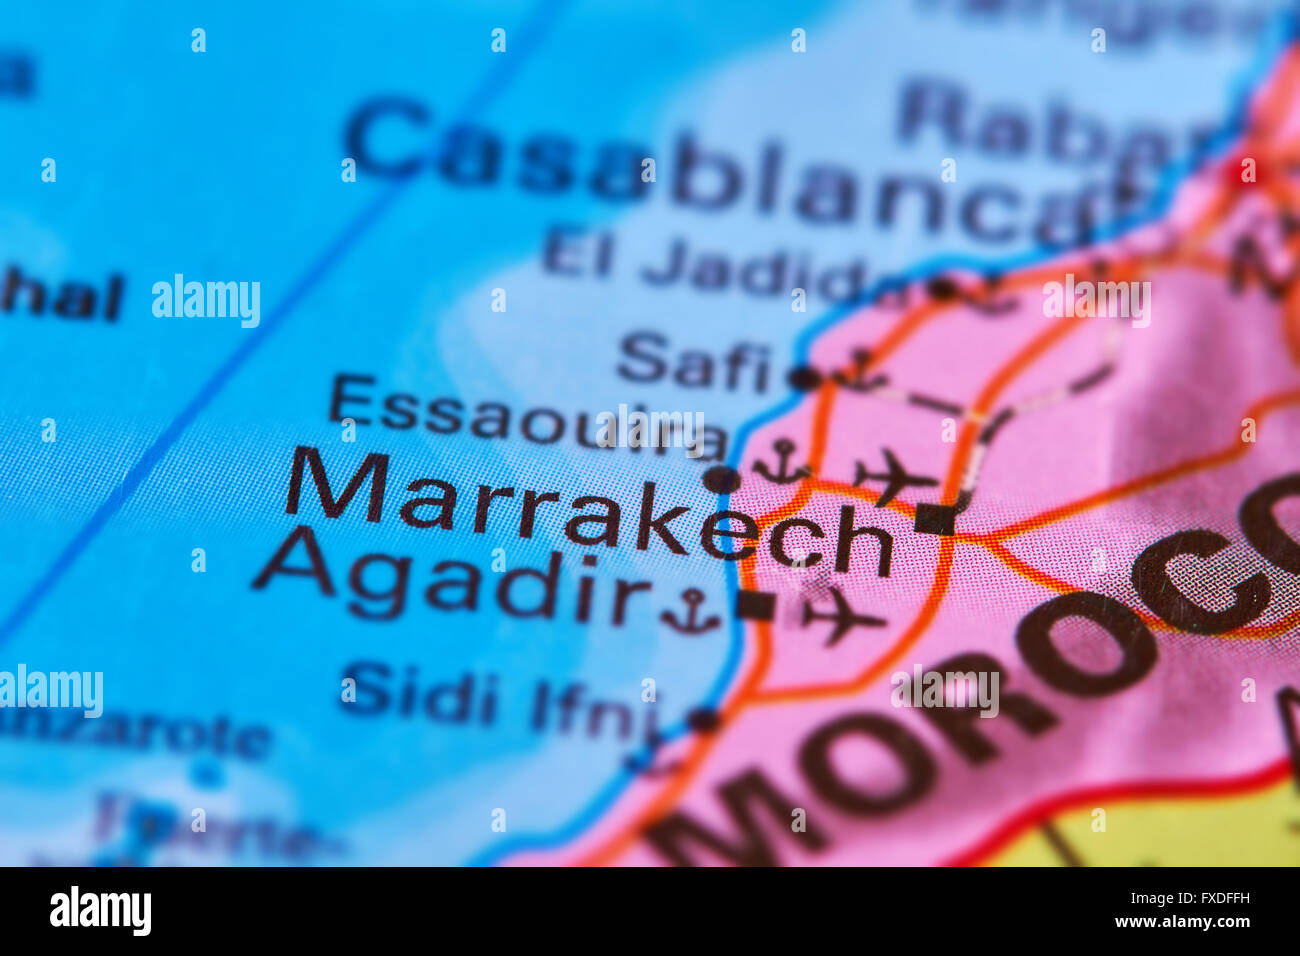 Marrakech City in Morocco, Africa on the World Map Stock Photo